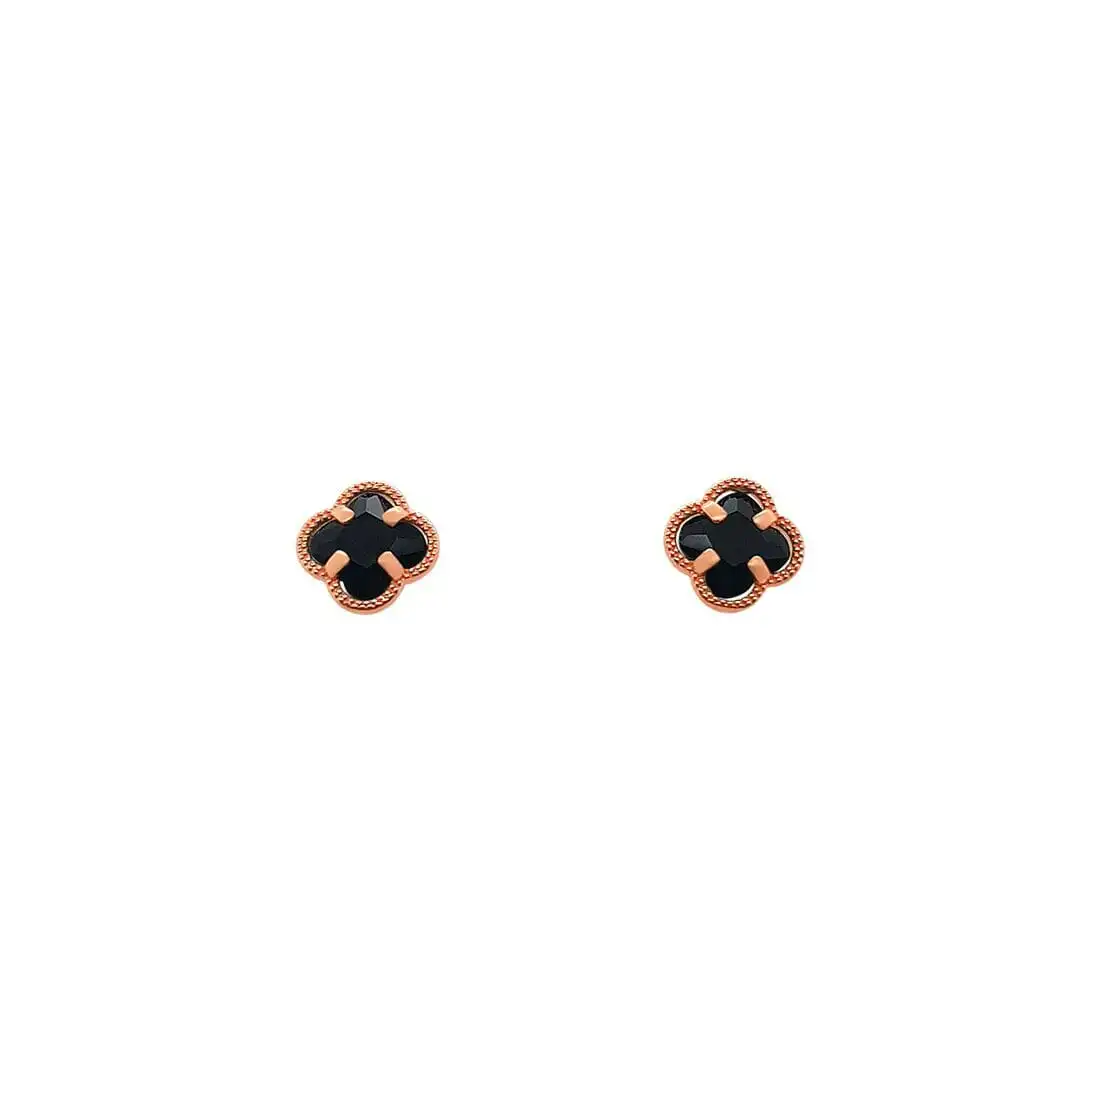 9ct Rose Gold Silver Infused 4 Leaf Clover Stud Earring with Black Crystal